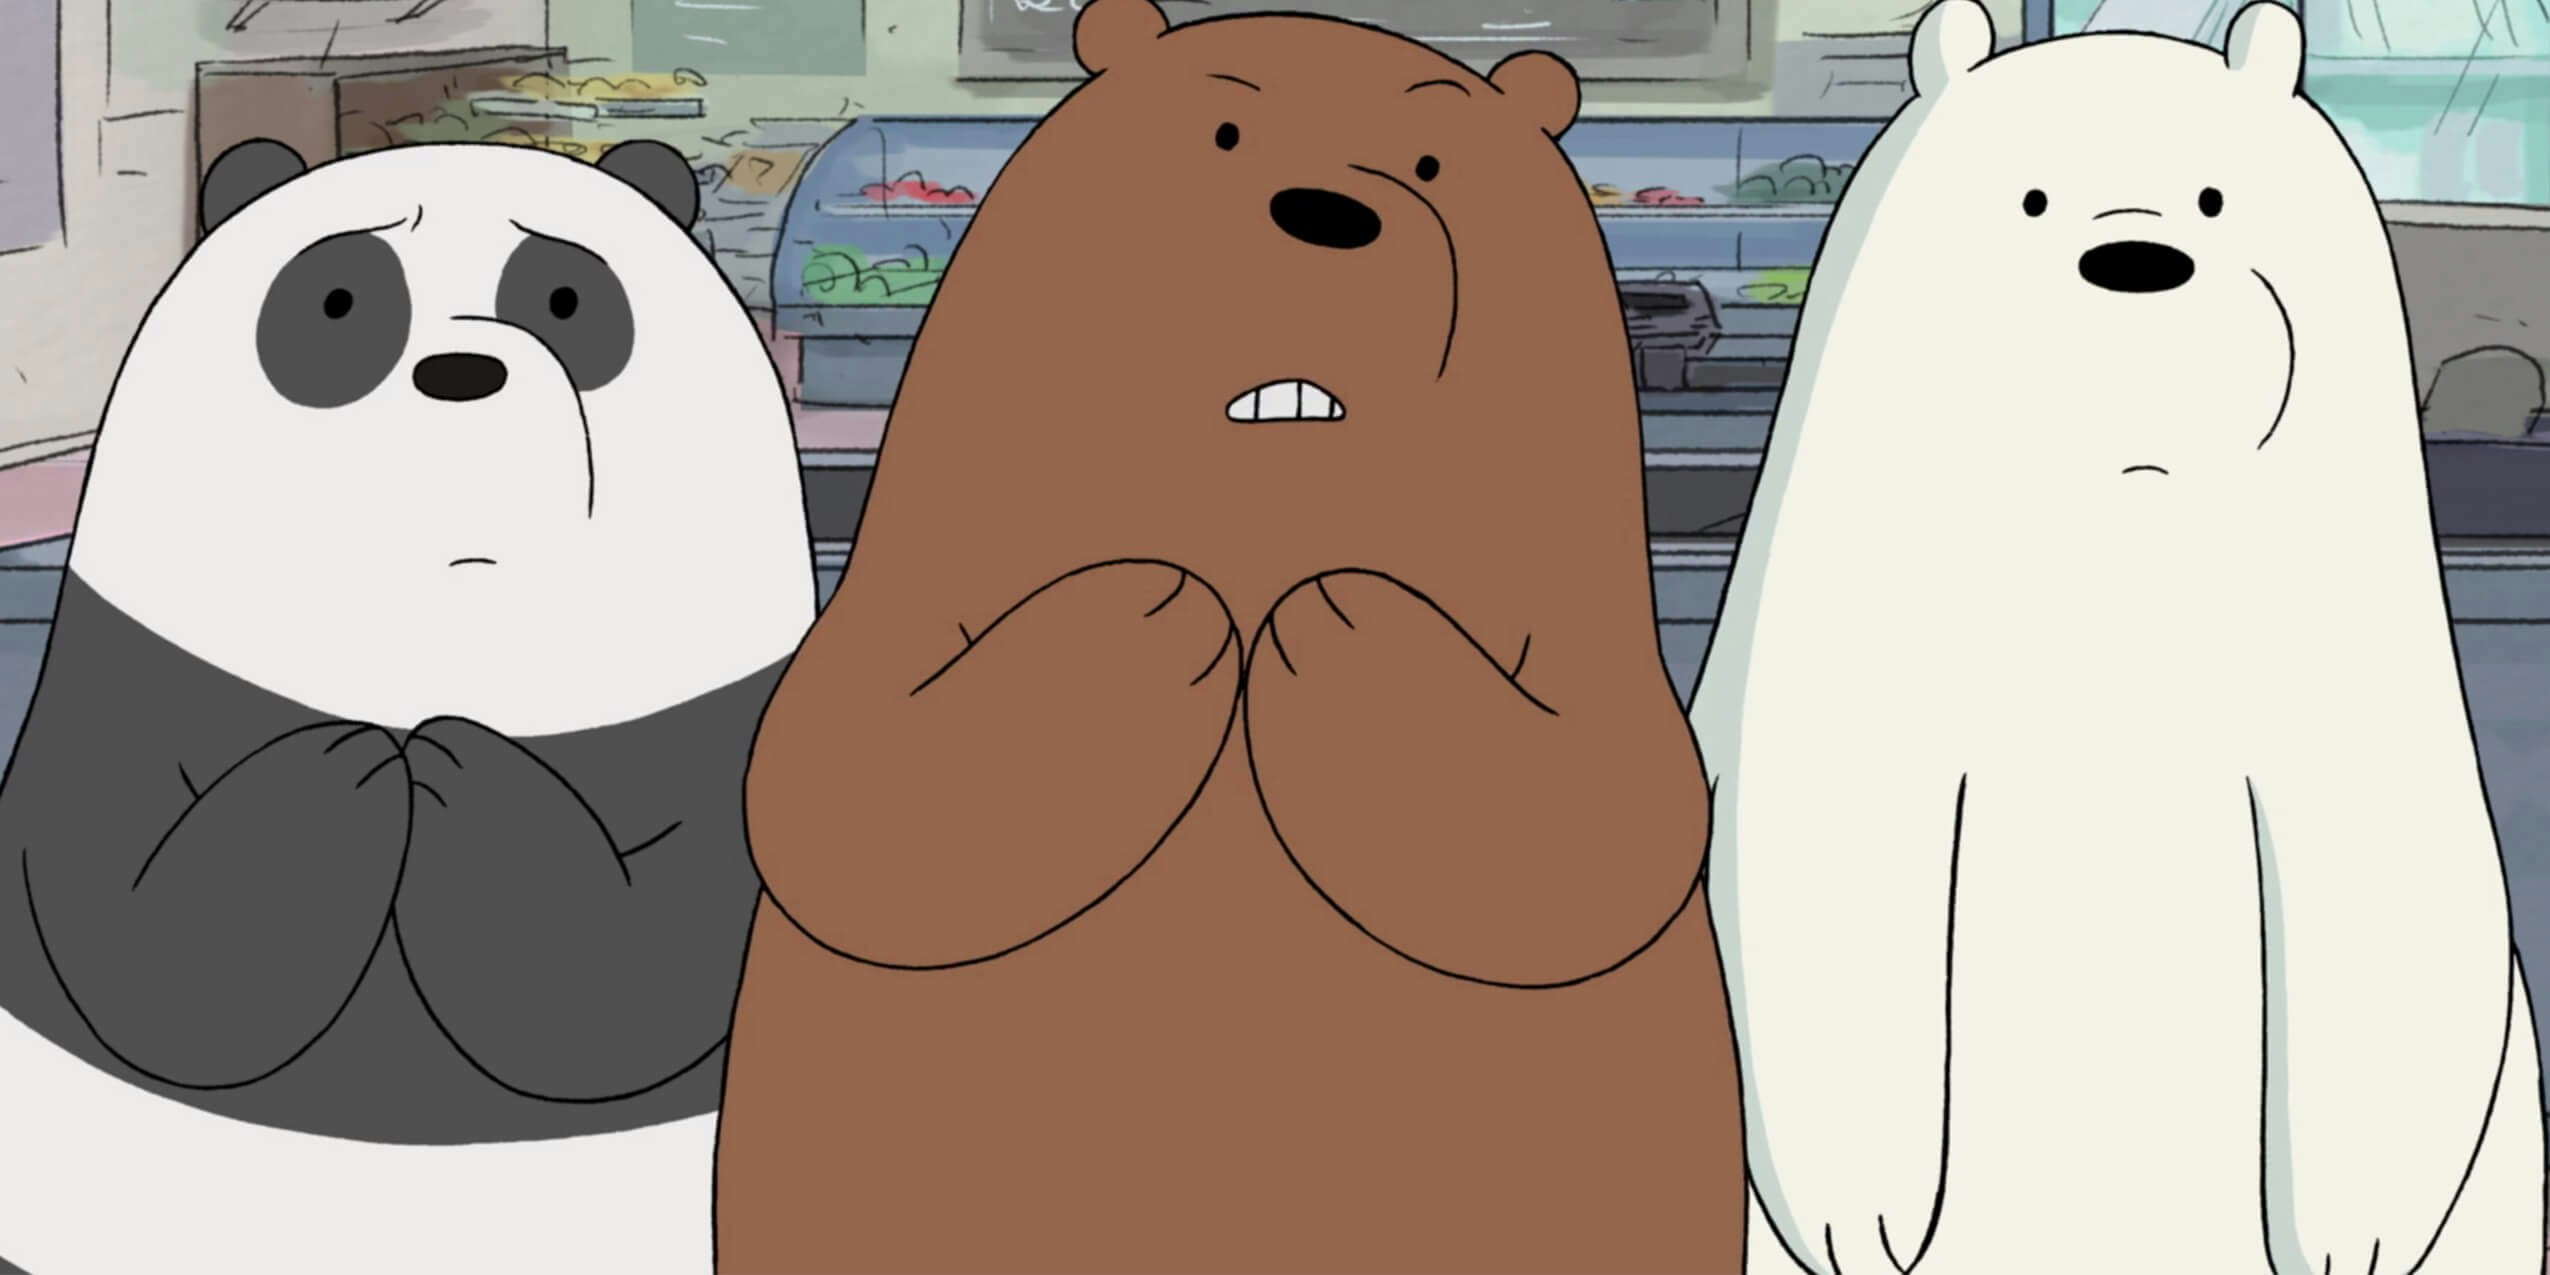 Stream 'We Bare Bears': How to Watch the Animated Series Online